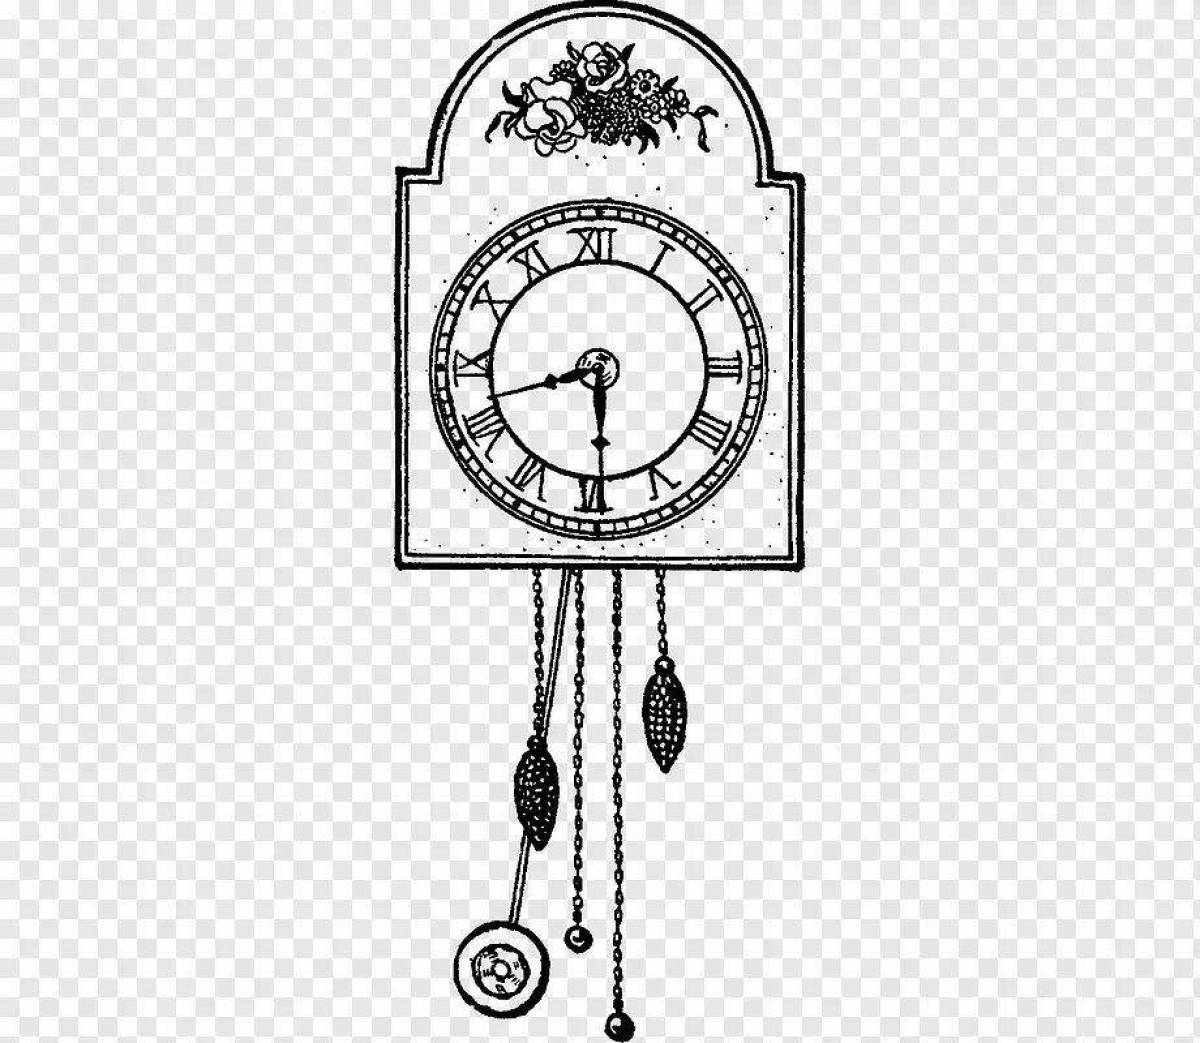 Coloring page majestic cuckoo clock